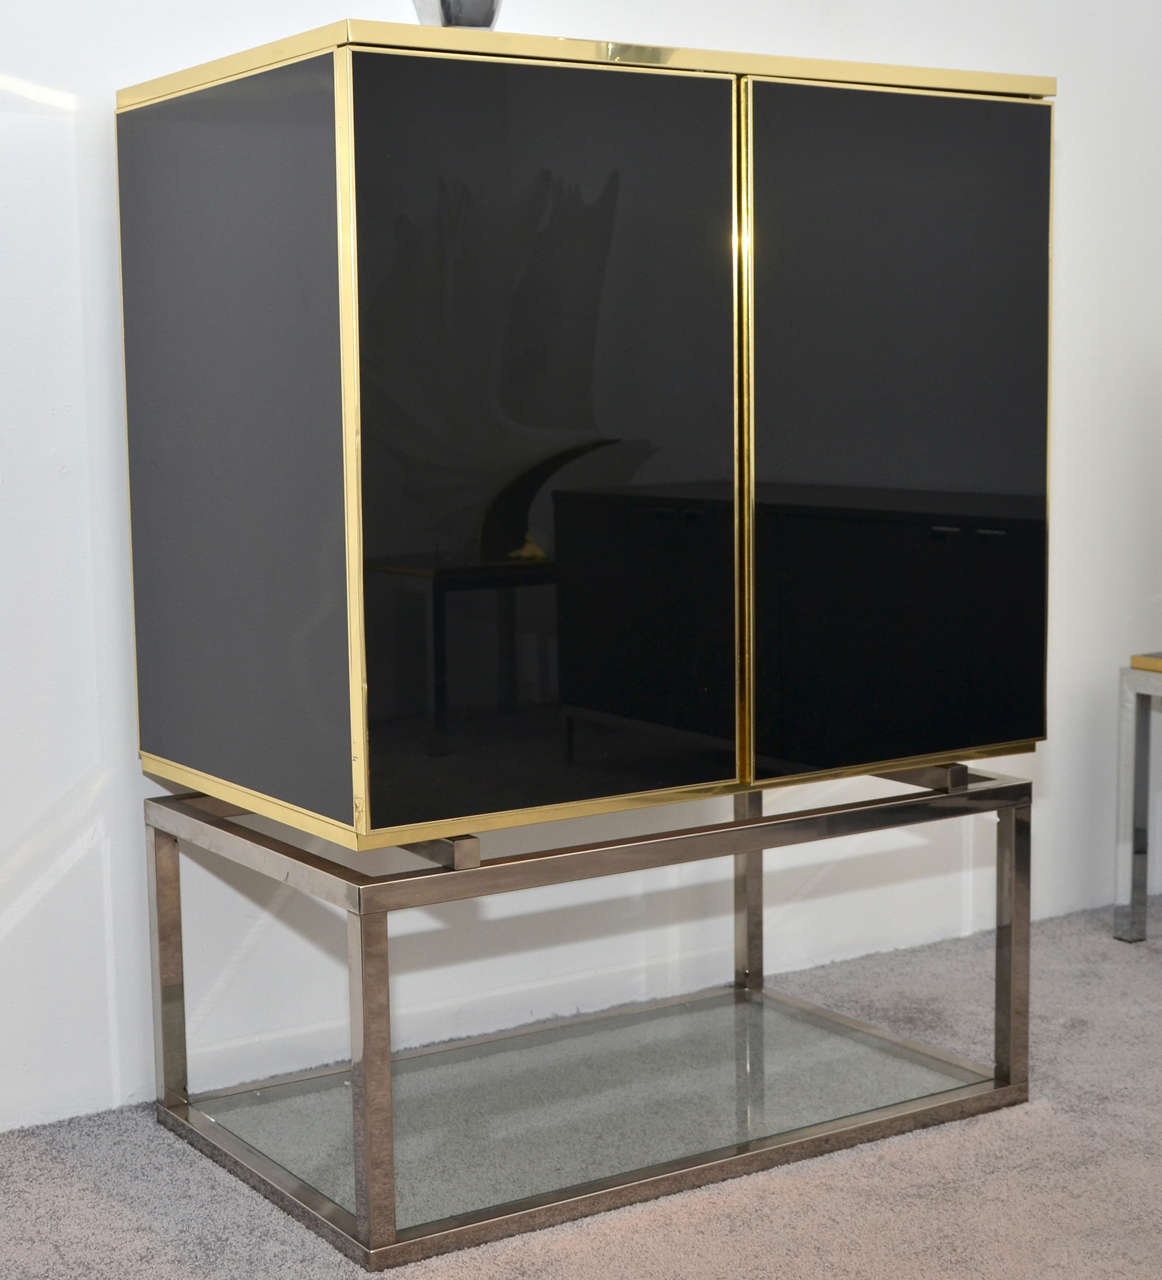 1970s cabinet by Maison Jansen with base in chromed steel and glass; structure in black lacquer and brass; two new interior glass shelves.